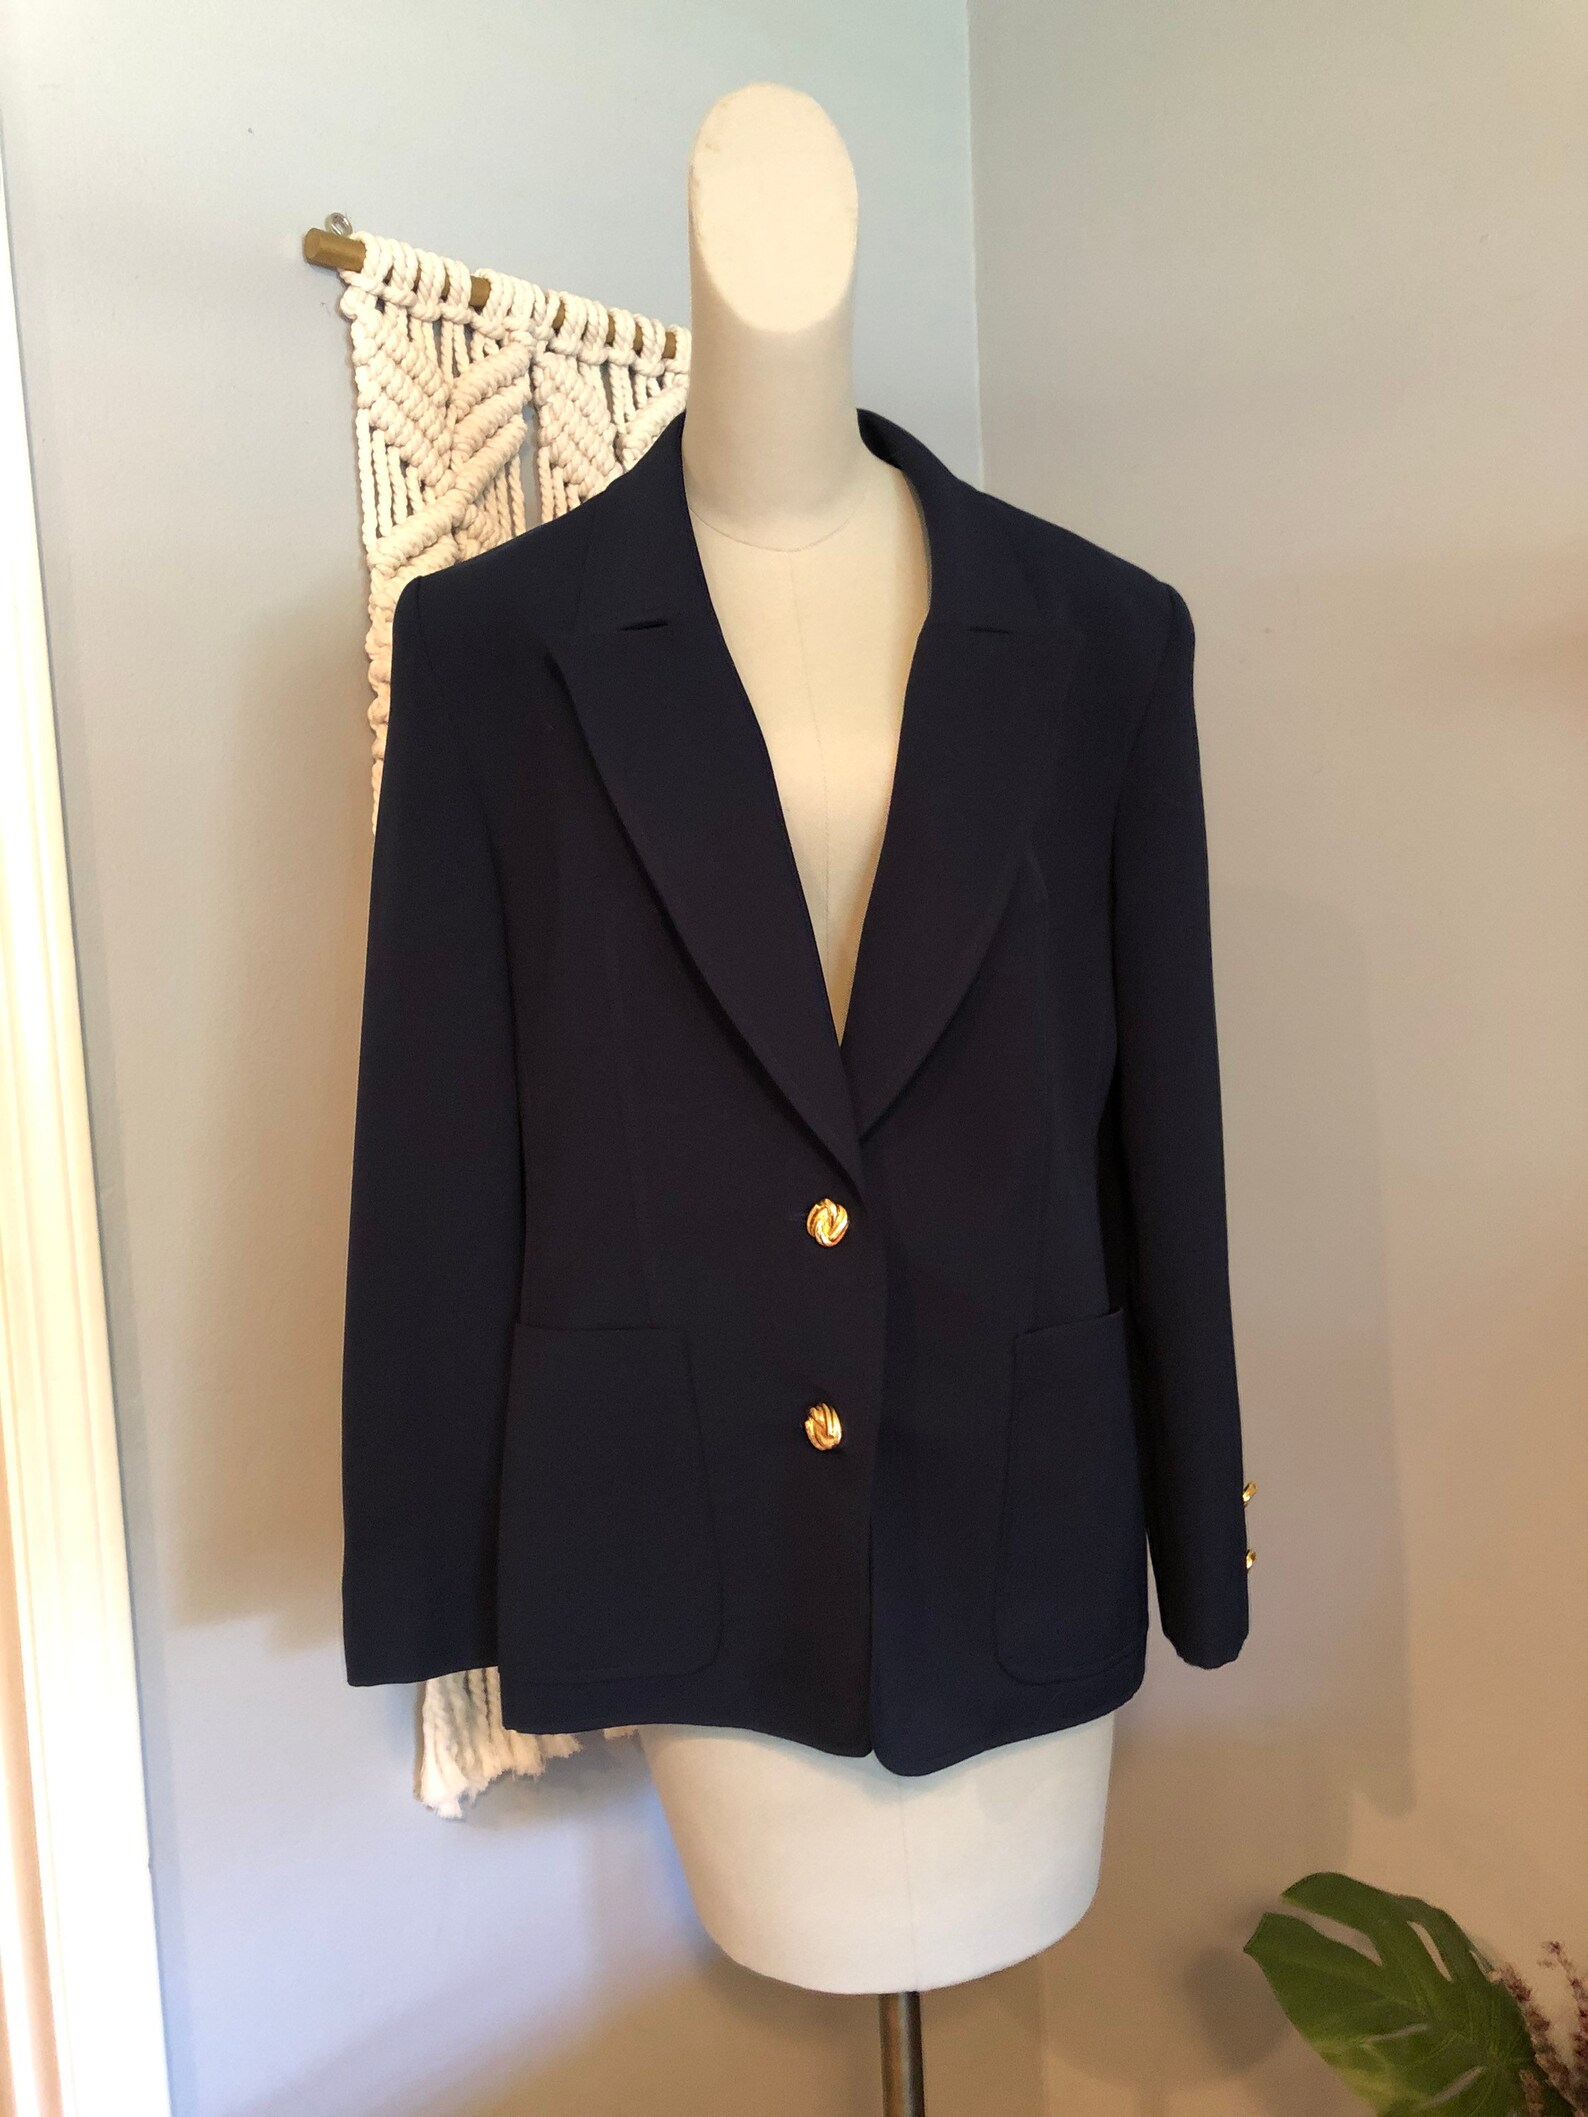 Vintage Oversized Blue Blazer with Gold Buttons | Etsy